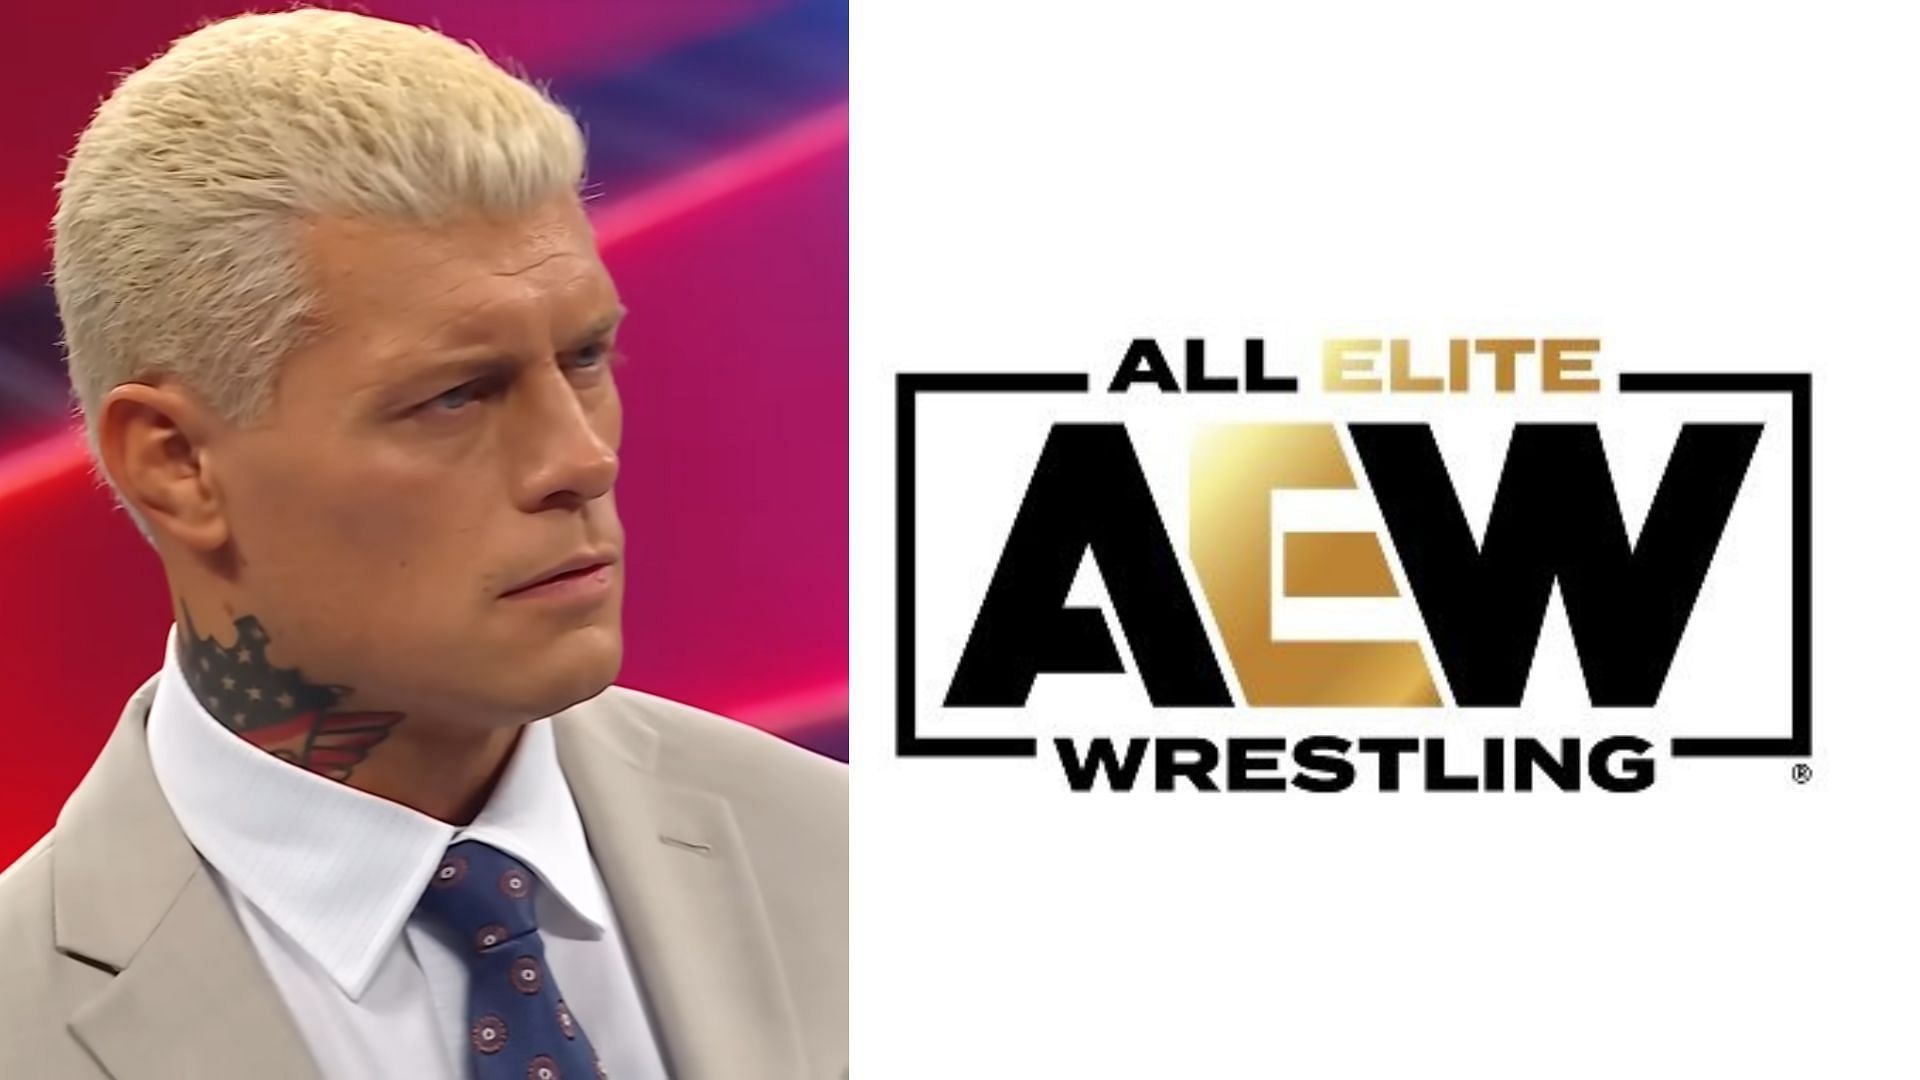 Cody Rhodes was signed with AEW from 2019 to 2022